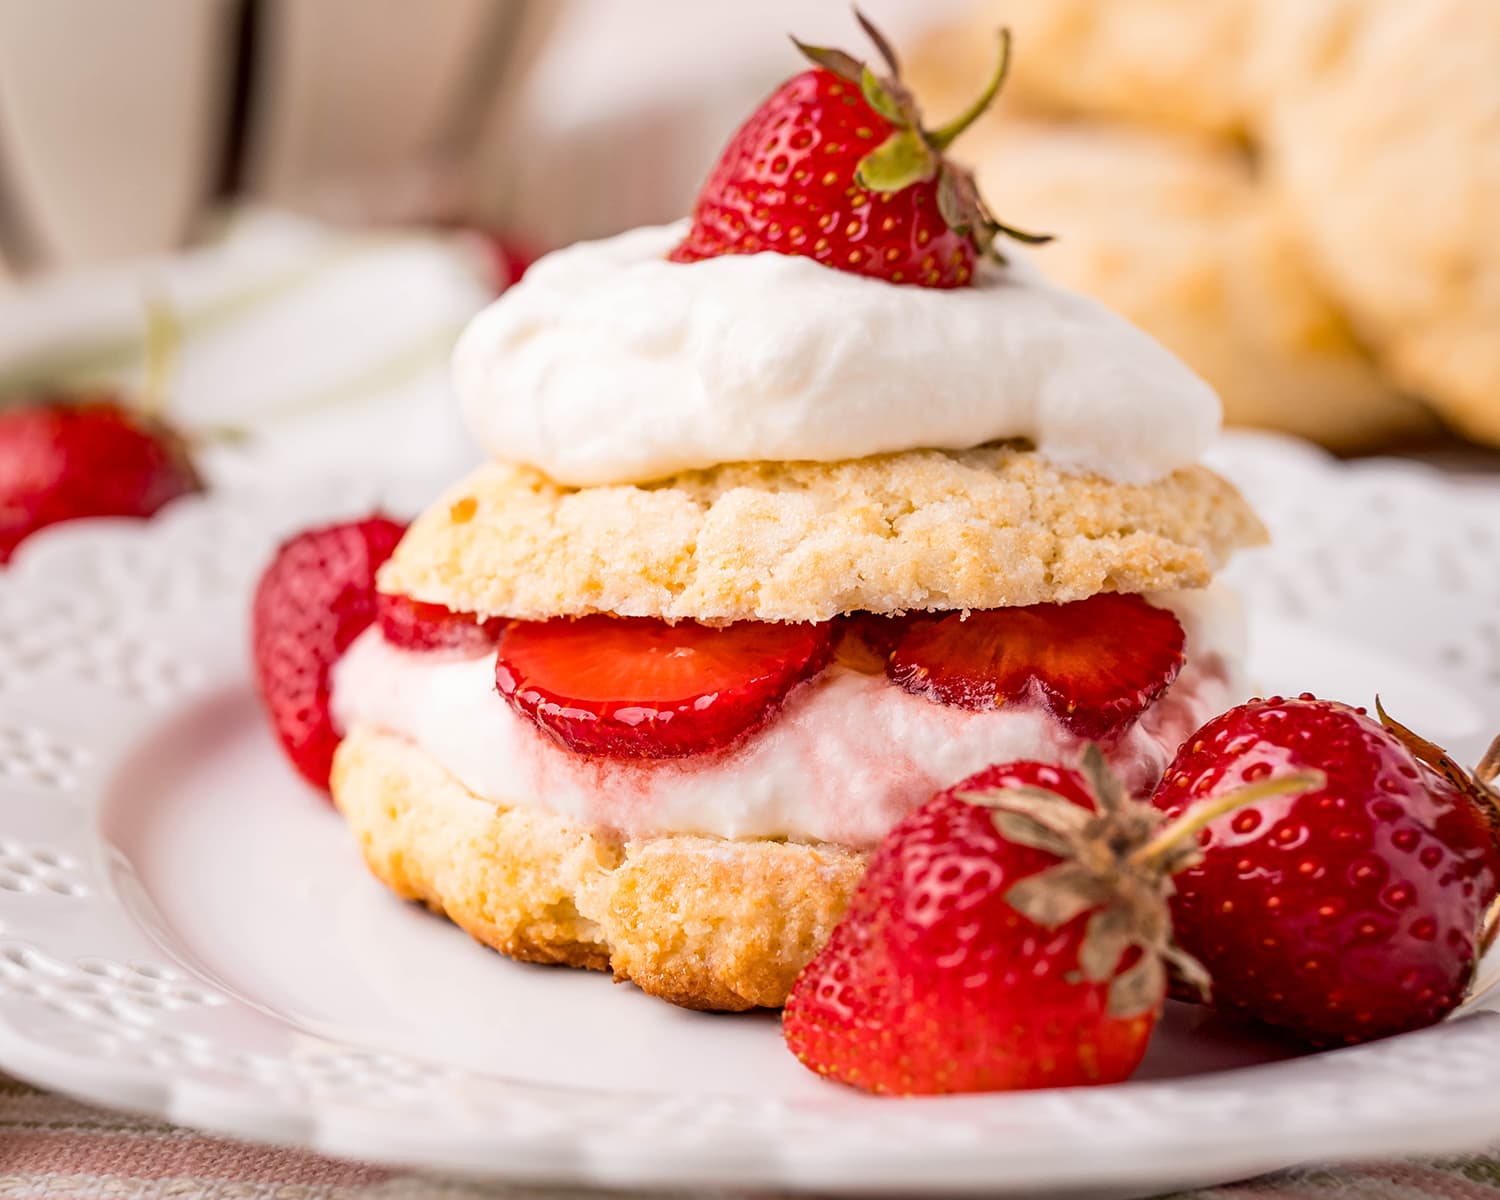 A strawberry shortcake on a plate, with a sweet biscuit, whipped cream, and strawberries.